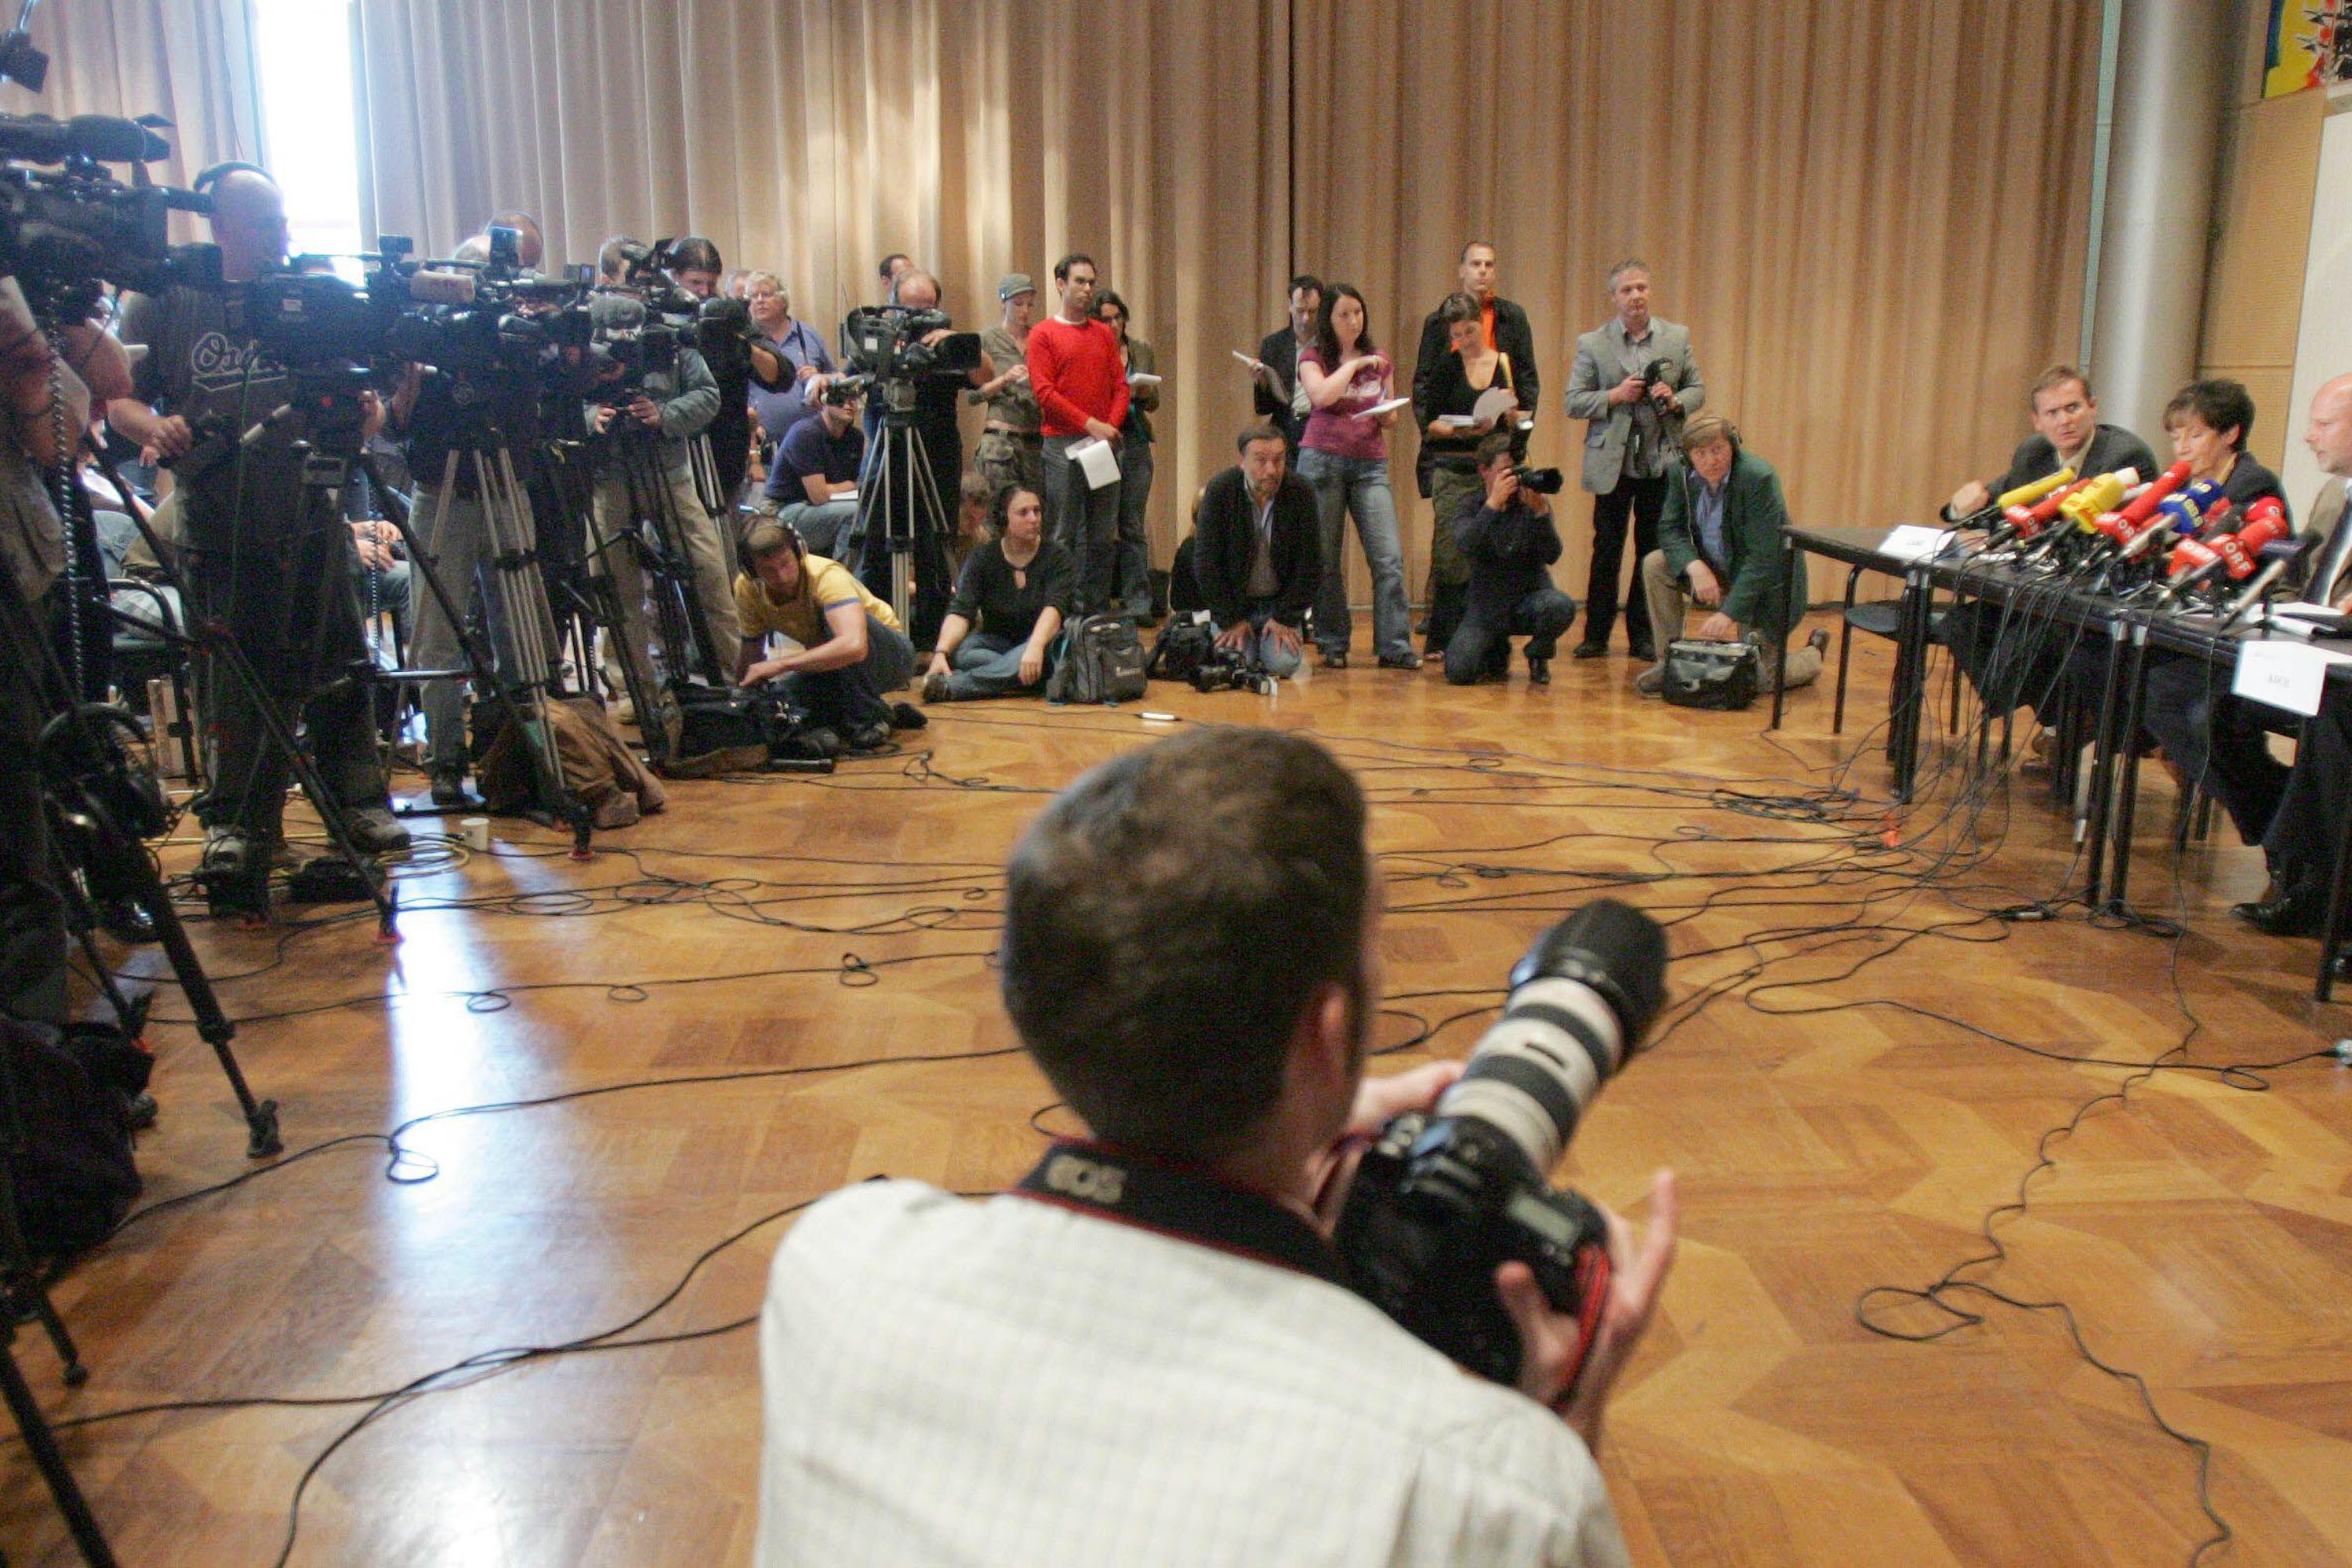 Press conference held when Natascha Kampusch's identity had been verified